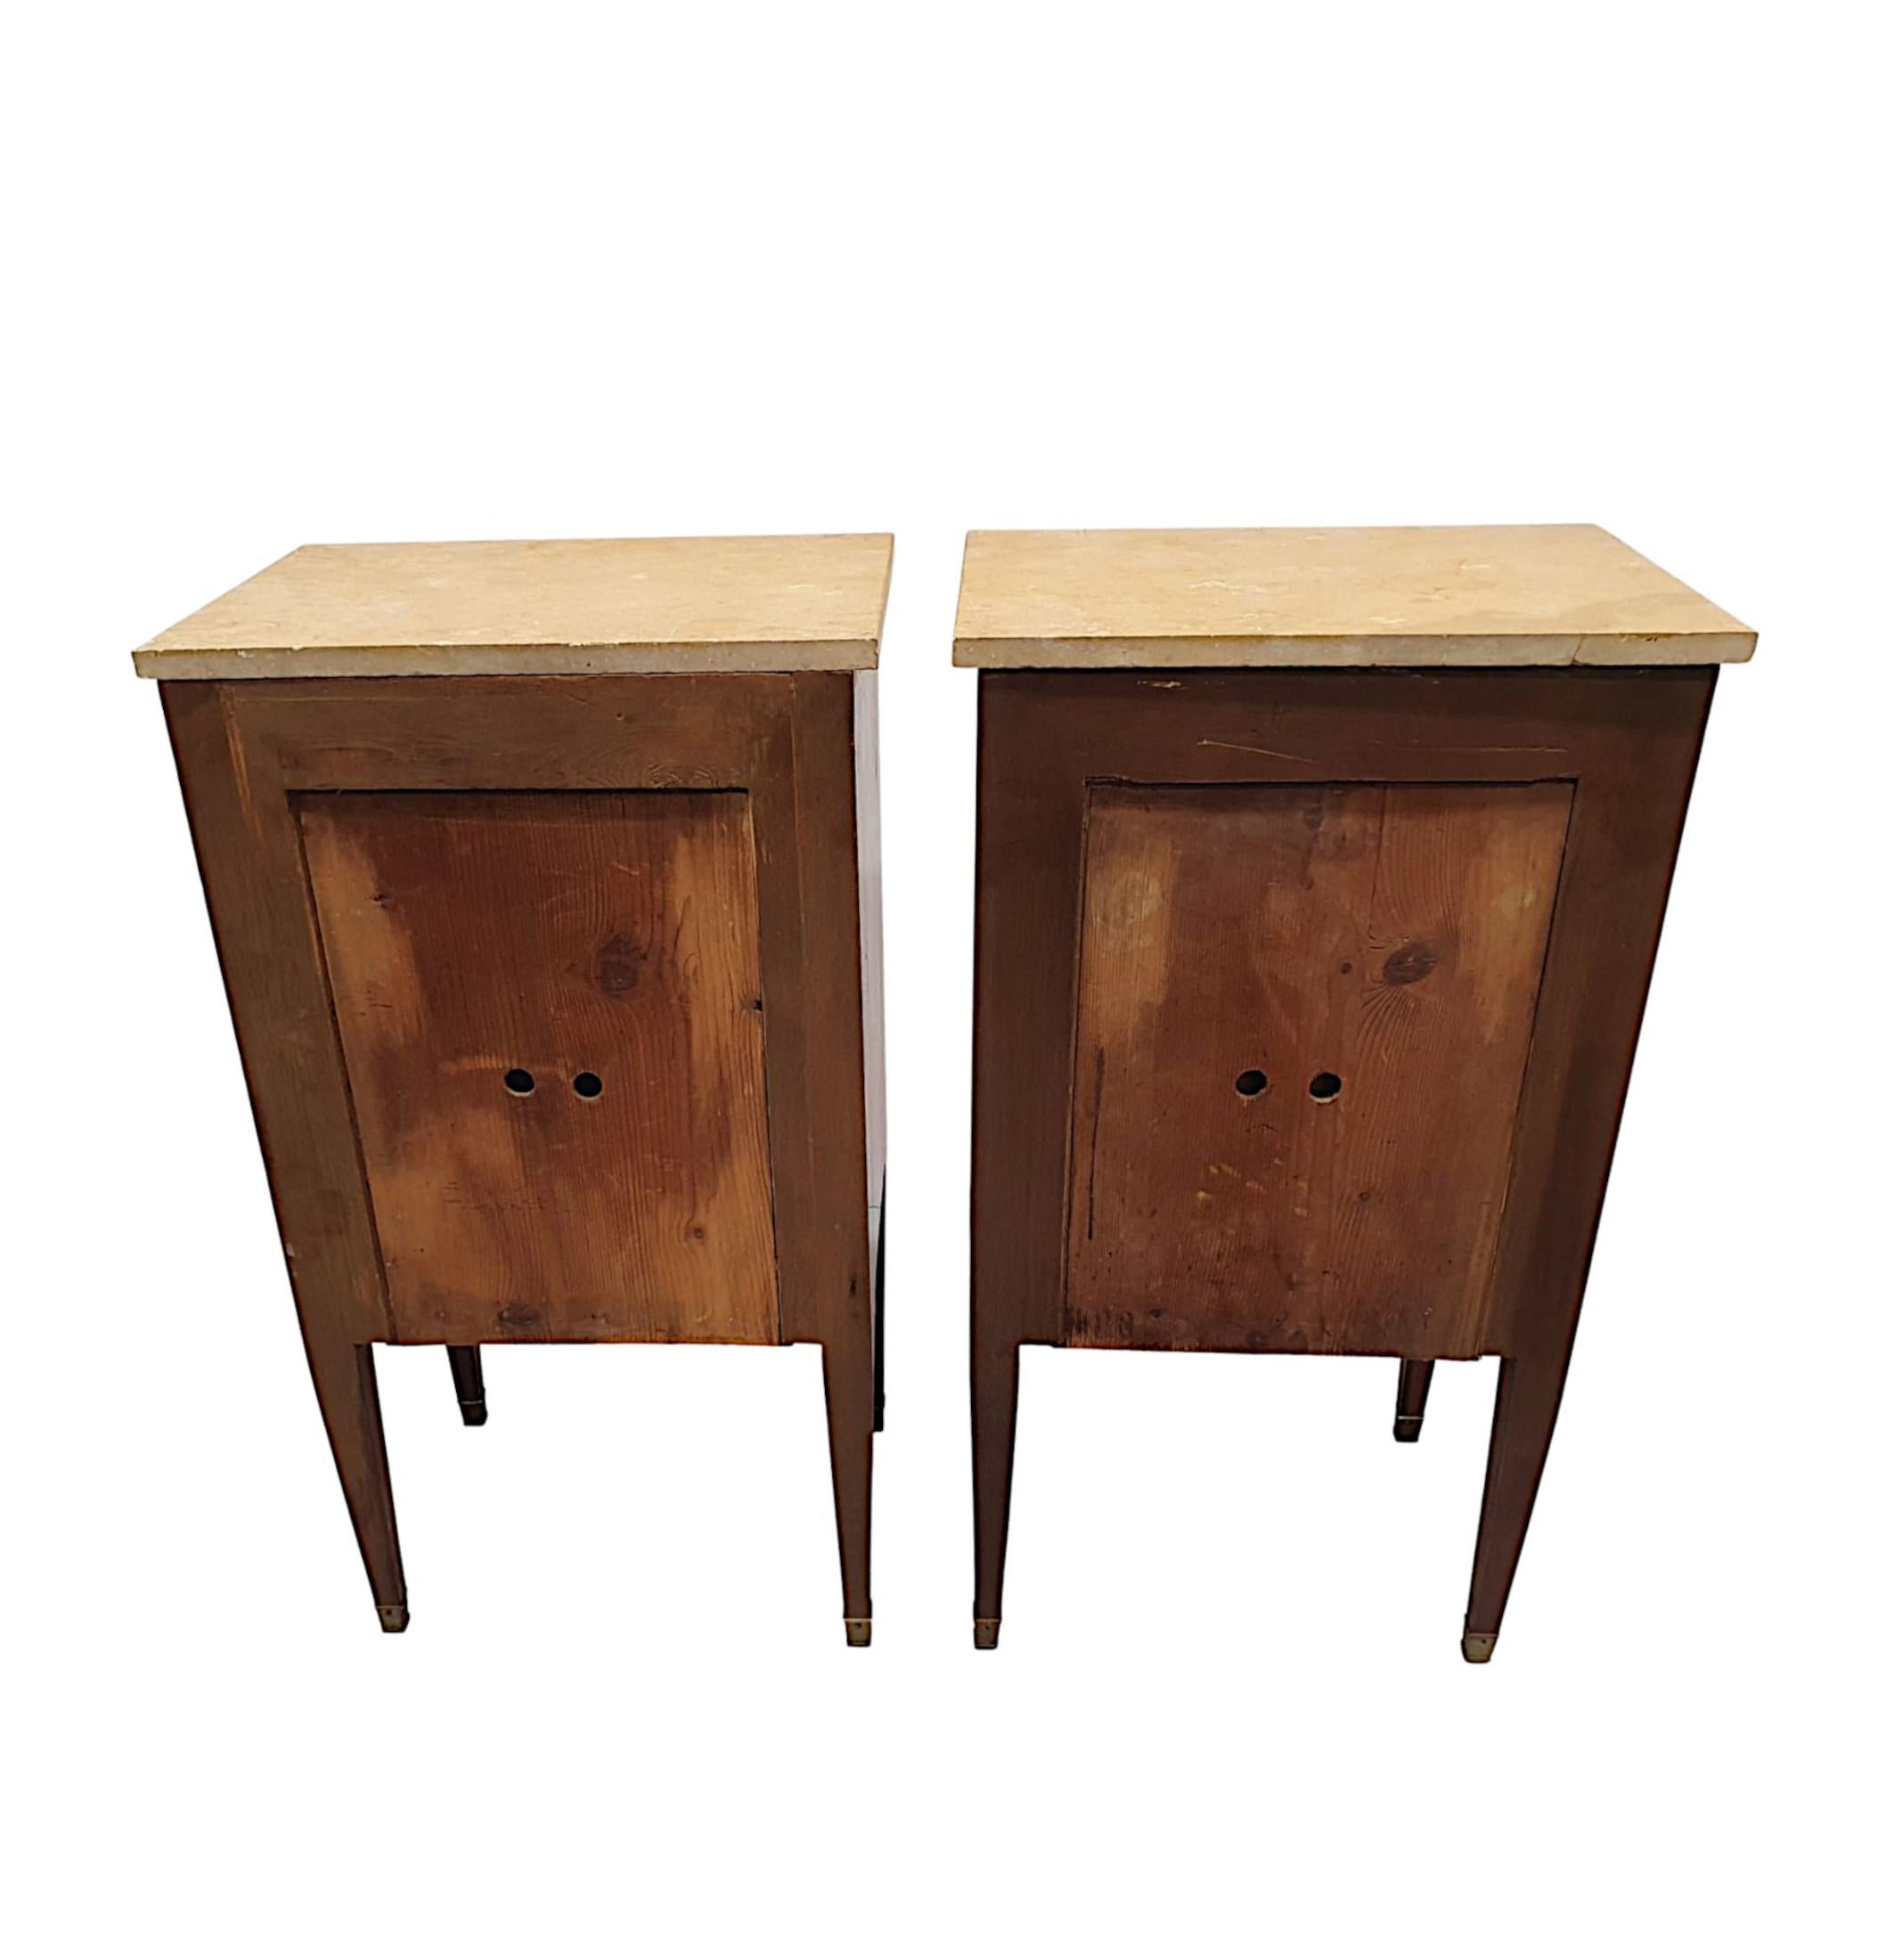 A Fine Pair of Early 20th Century Highly Inlaid Marble Top Bedside Chests For Sale 2